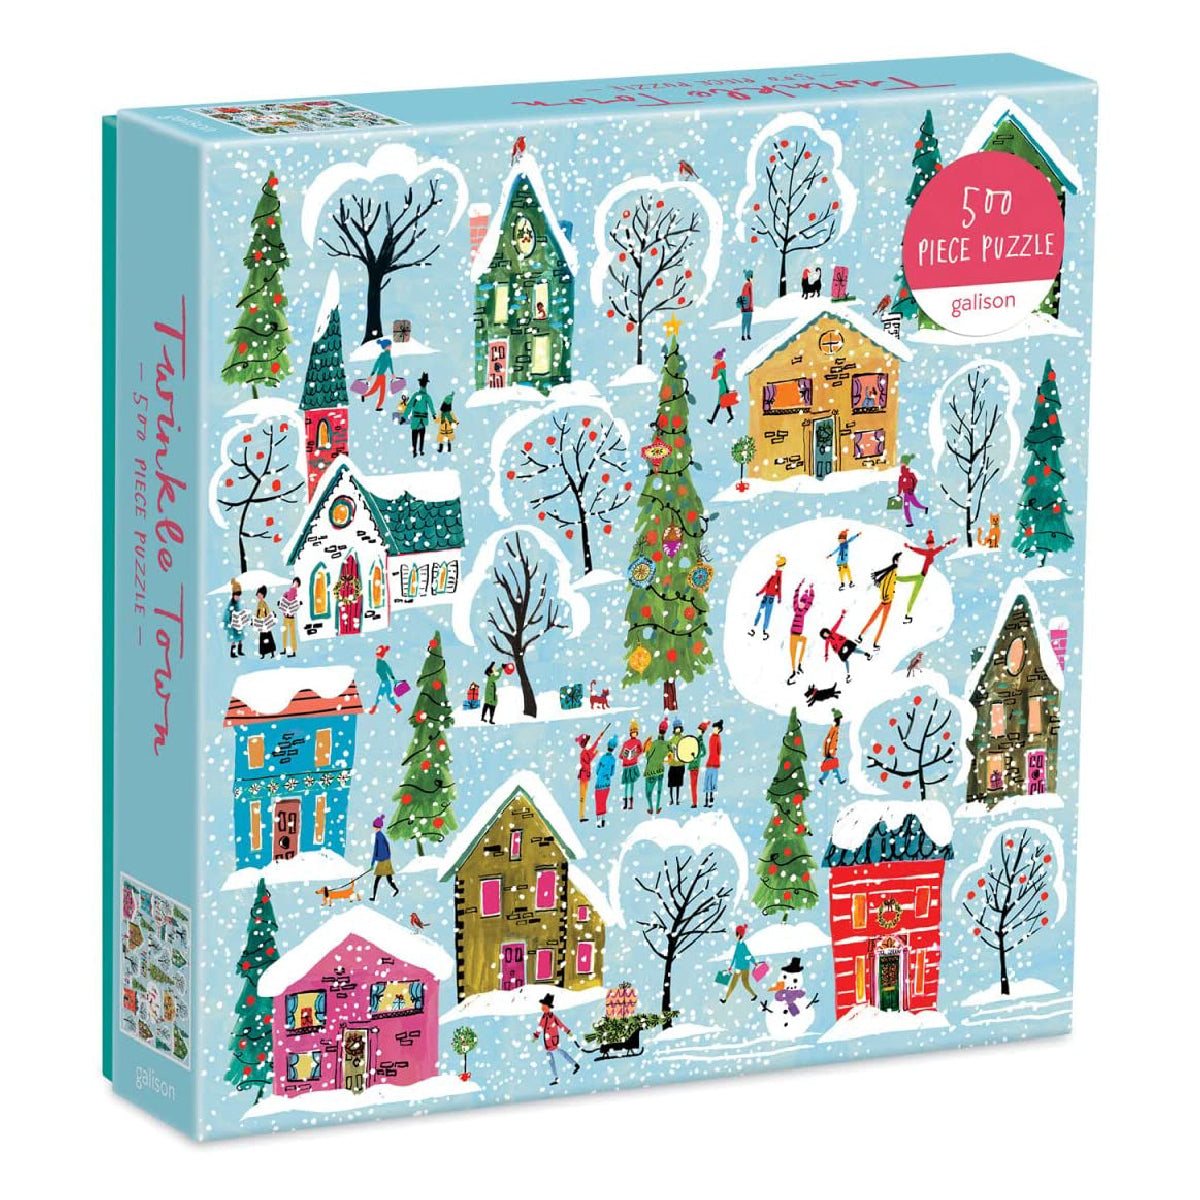 Twinkle Town 500 Piece Puzzle from Galison - Featuring Colorful and Whimsical Illustrations of a Festive Snowy Town